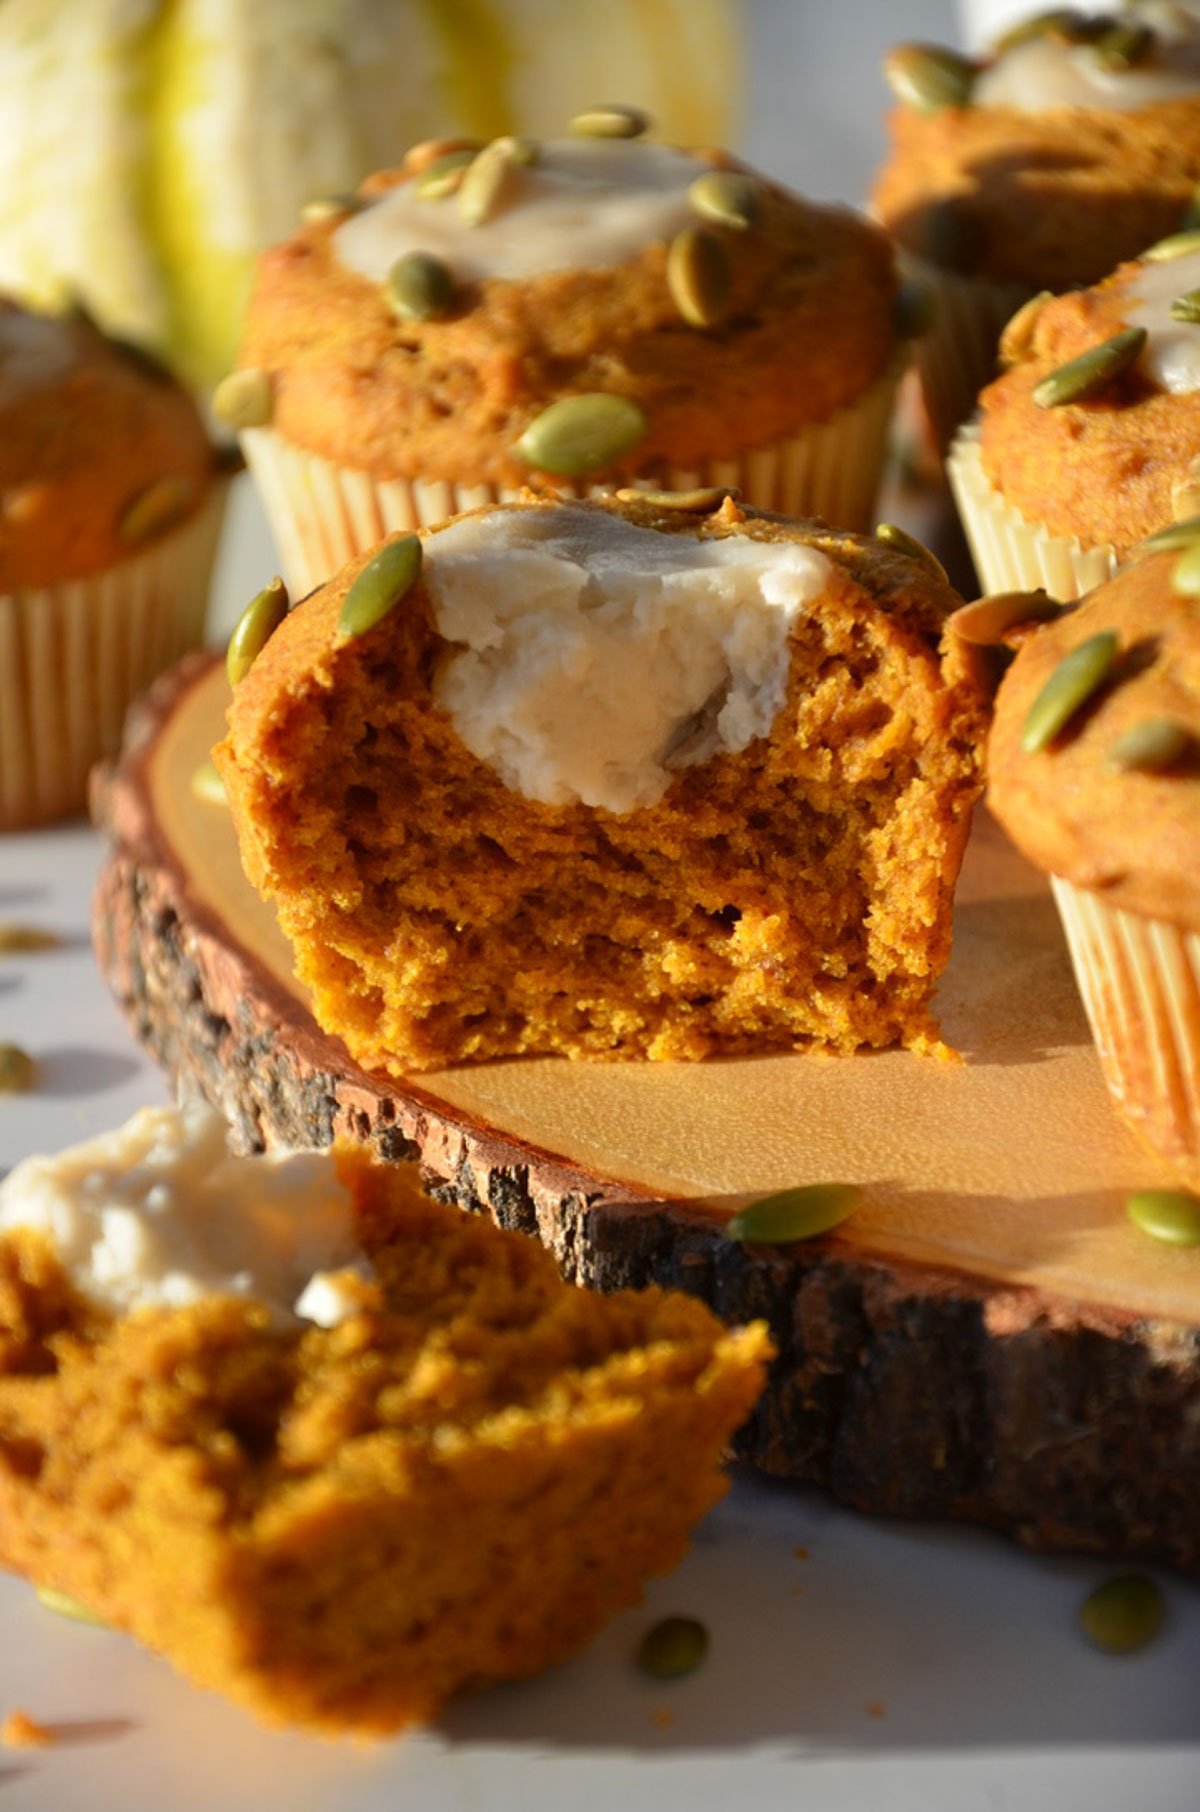 A pumpkin muffin on the table cut in half to show the filling in the middle.